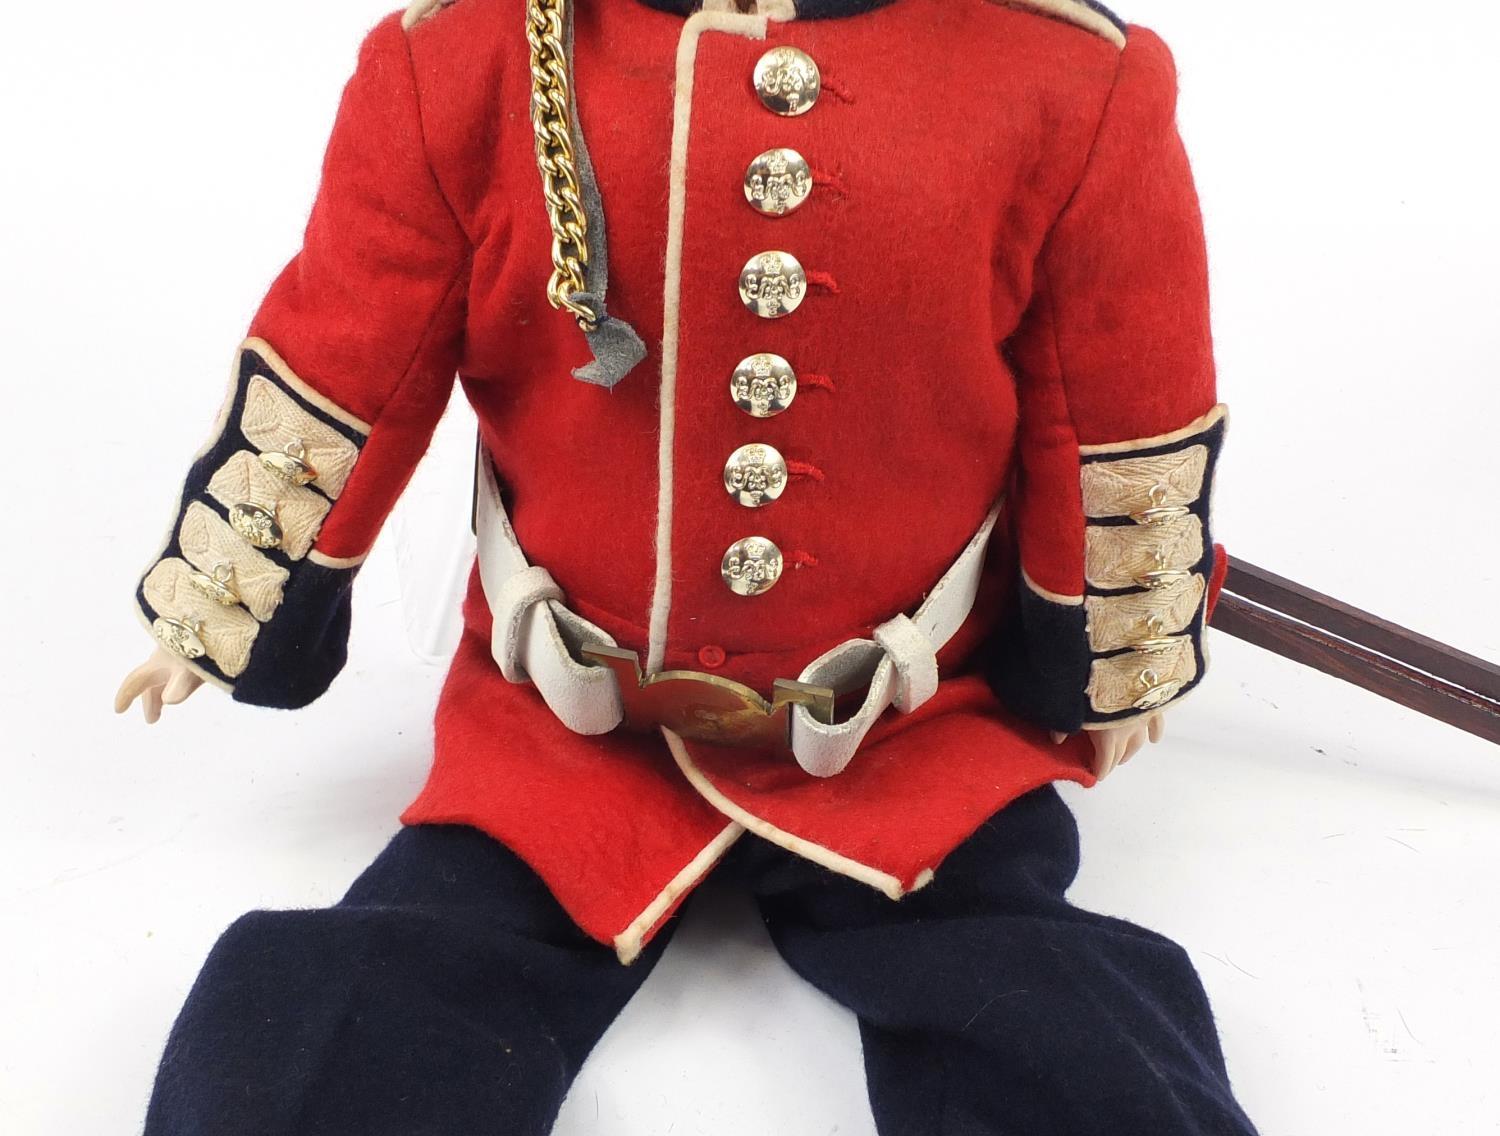 Simon & Halbig bisque headed Beefeater doll, 71cm high - Image 3 of 6